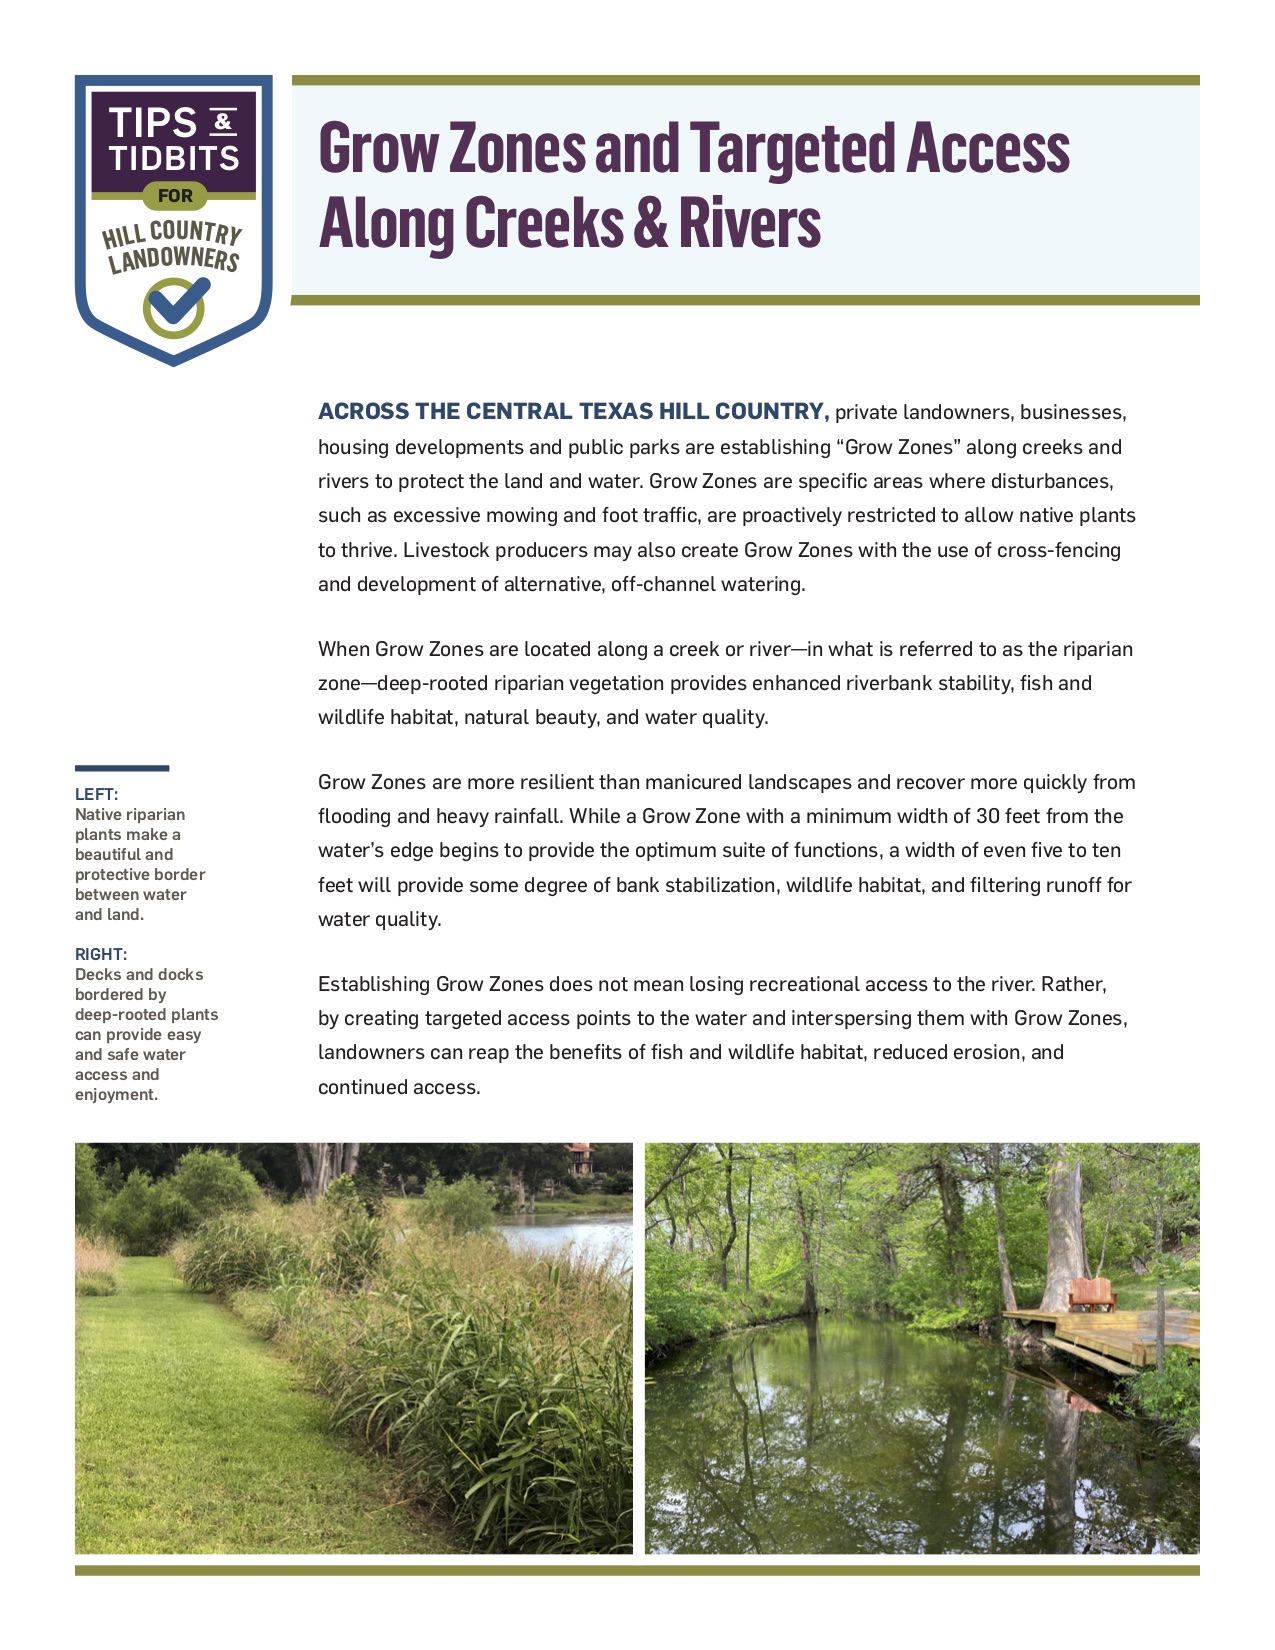 Cover for PDF "Grow Zones and Targeted Access Along Creeks & Rivers"